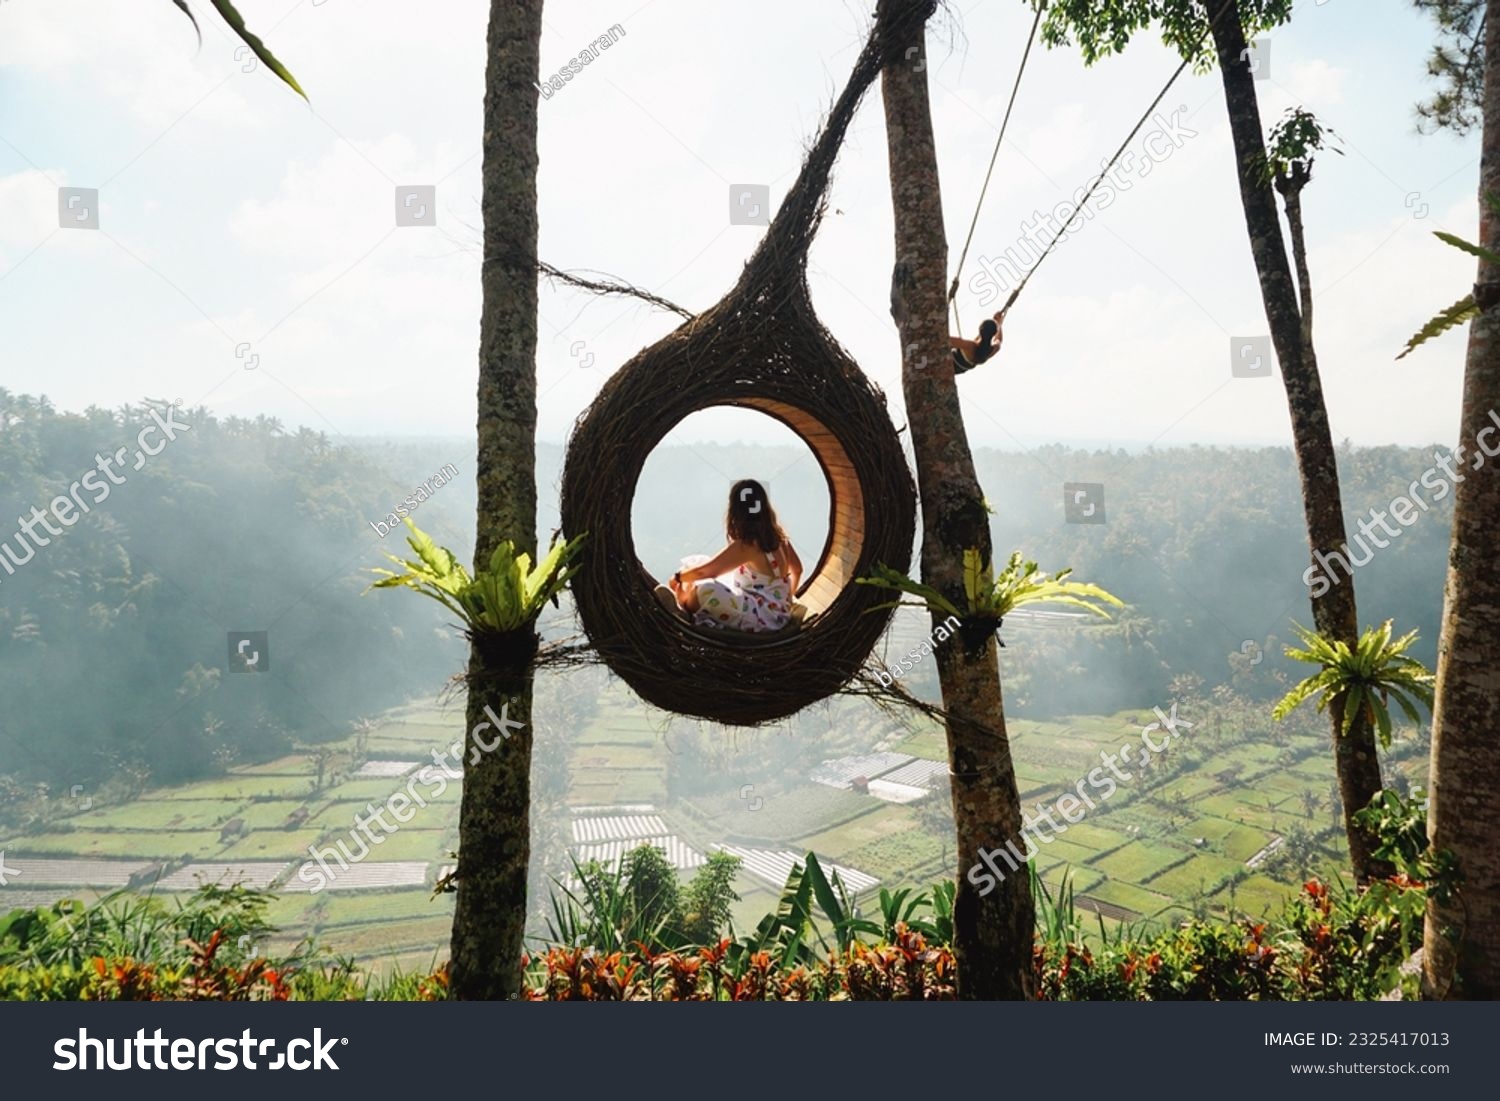 A young woman tourist sitting in a bird nest, immersed in the breathtaking green landscape of Bali on a sunny day. Tourist doing jungle swing. Rice fields and forest in background. Indonesia. #2325417013